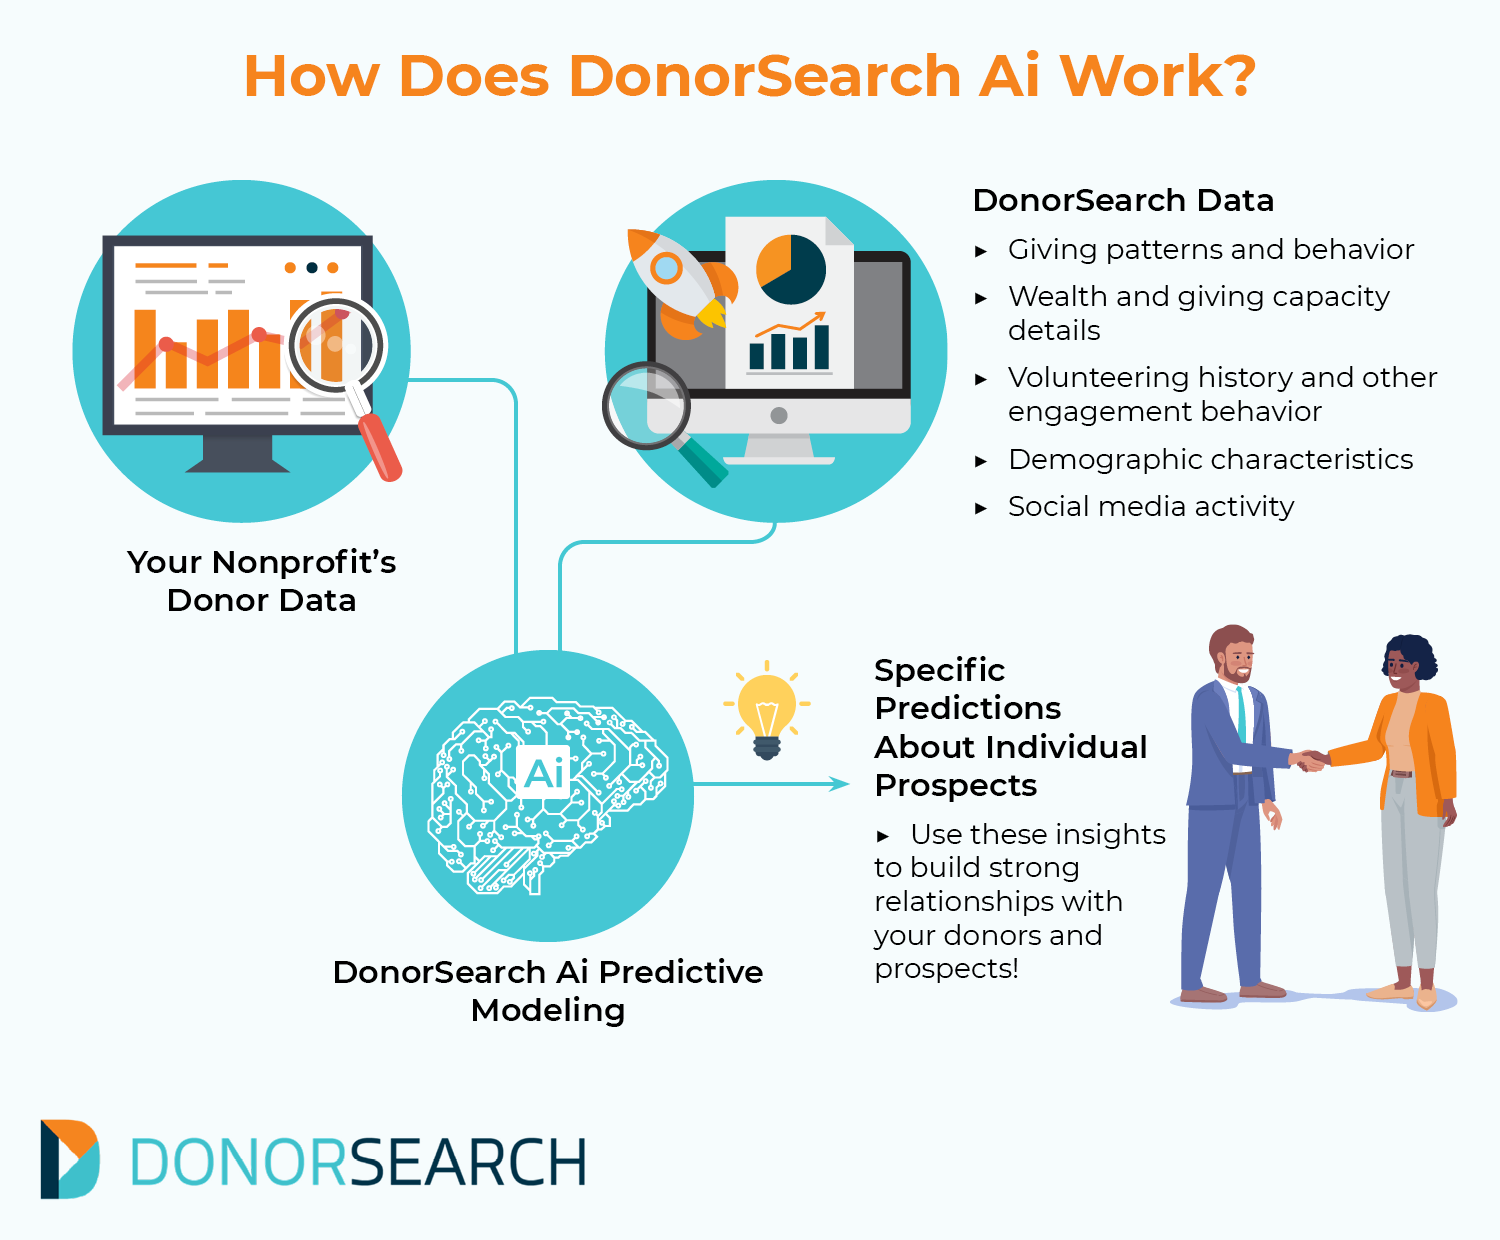 This image and the text below describe how DonorSearch Ai works. 